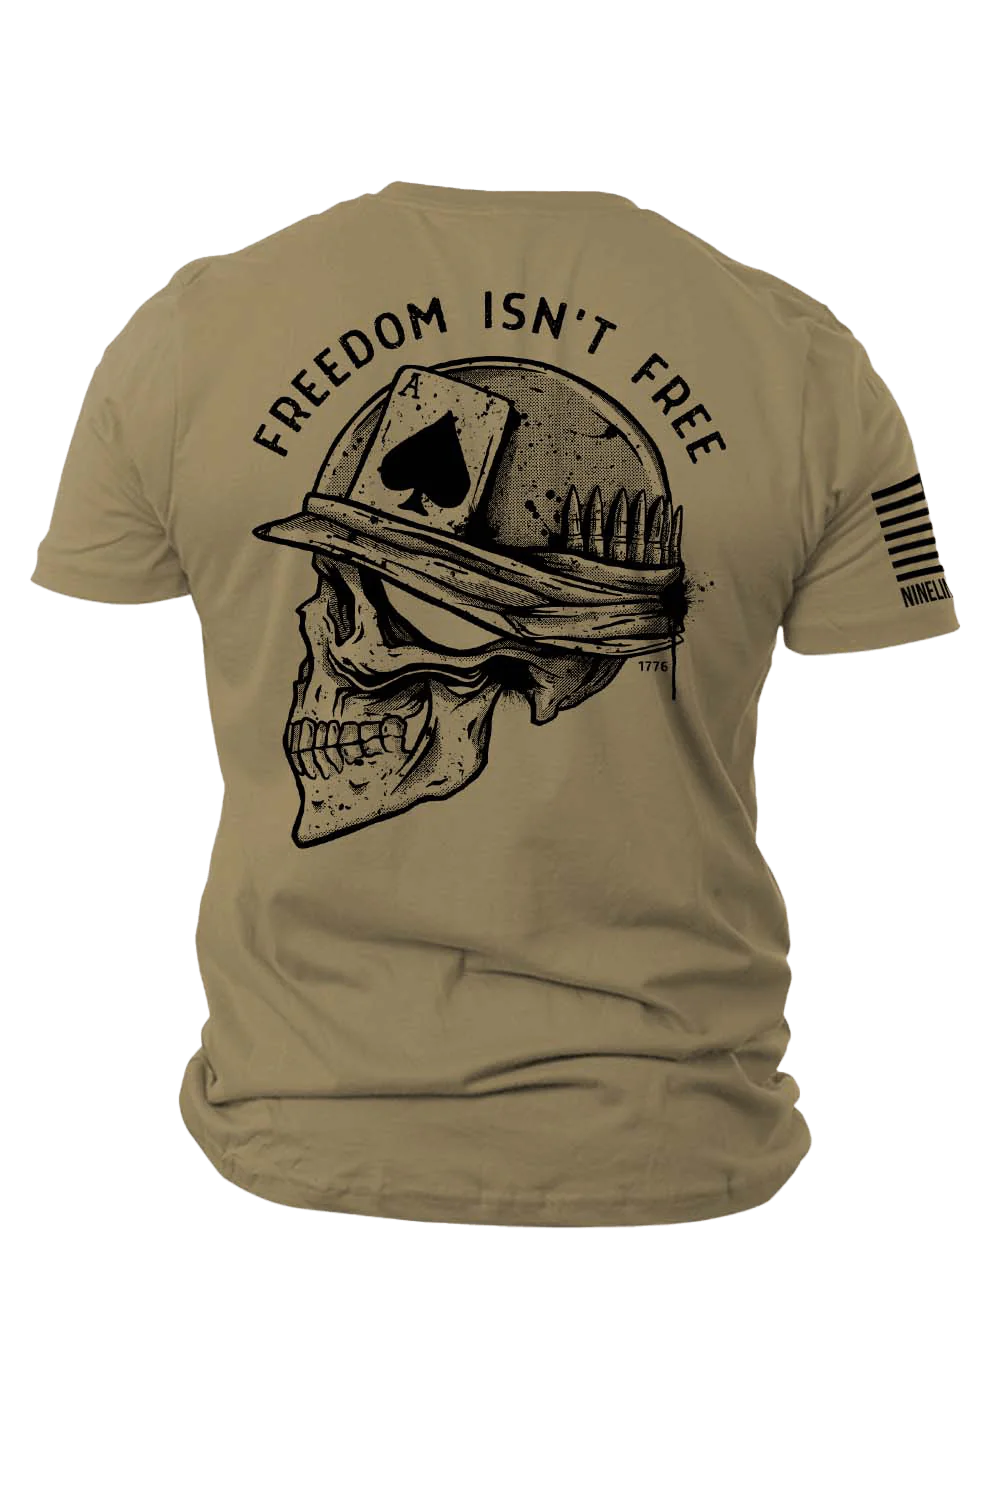 Nine Line T-Shirt - Freedom Isn't Free posted by ProdOrigin USA in Men's Apparel